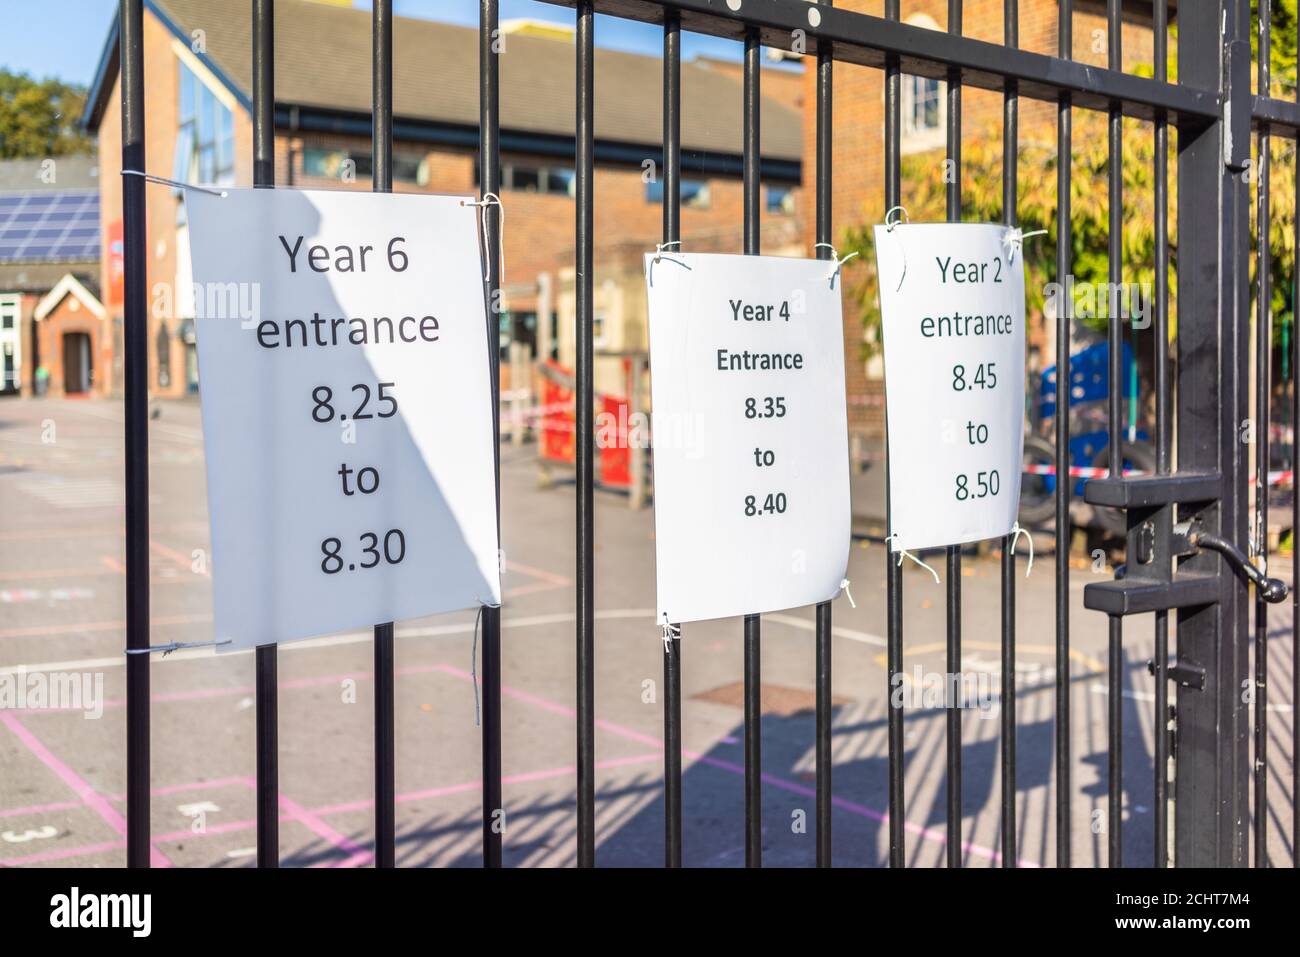 Southampton, UK. 14 September 2020. Covid-19 notice social distancing safeguarding, staggered entrance time slots for school children separated by year, signs at a fence near the entrance to the Freemantle Community Primary School in Southampton, Hampshire, England, UK Stock Photo